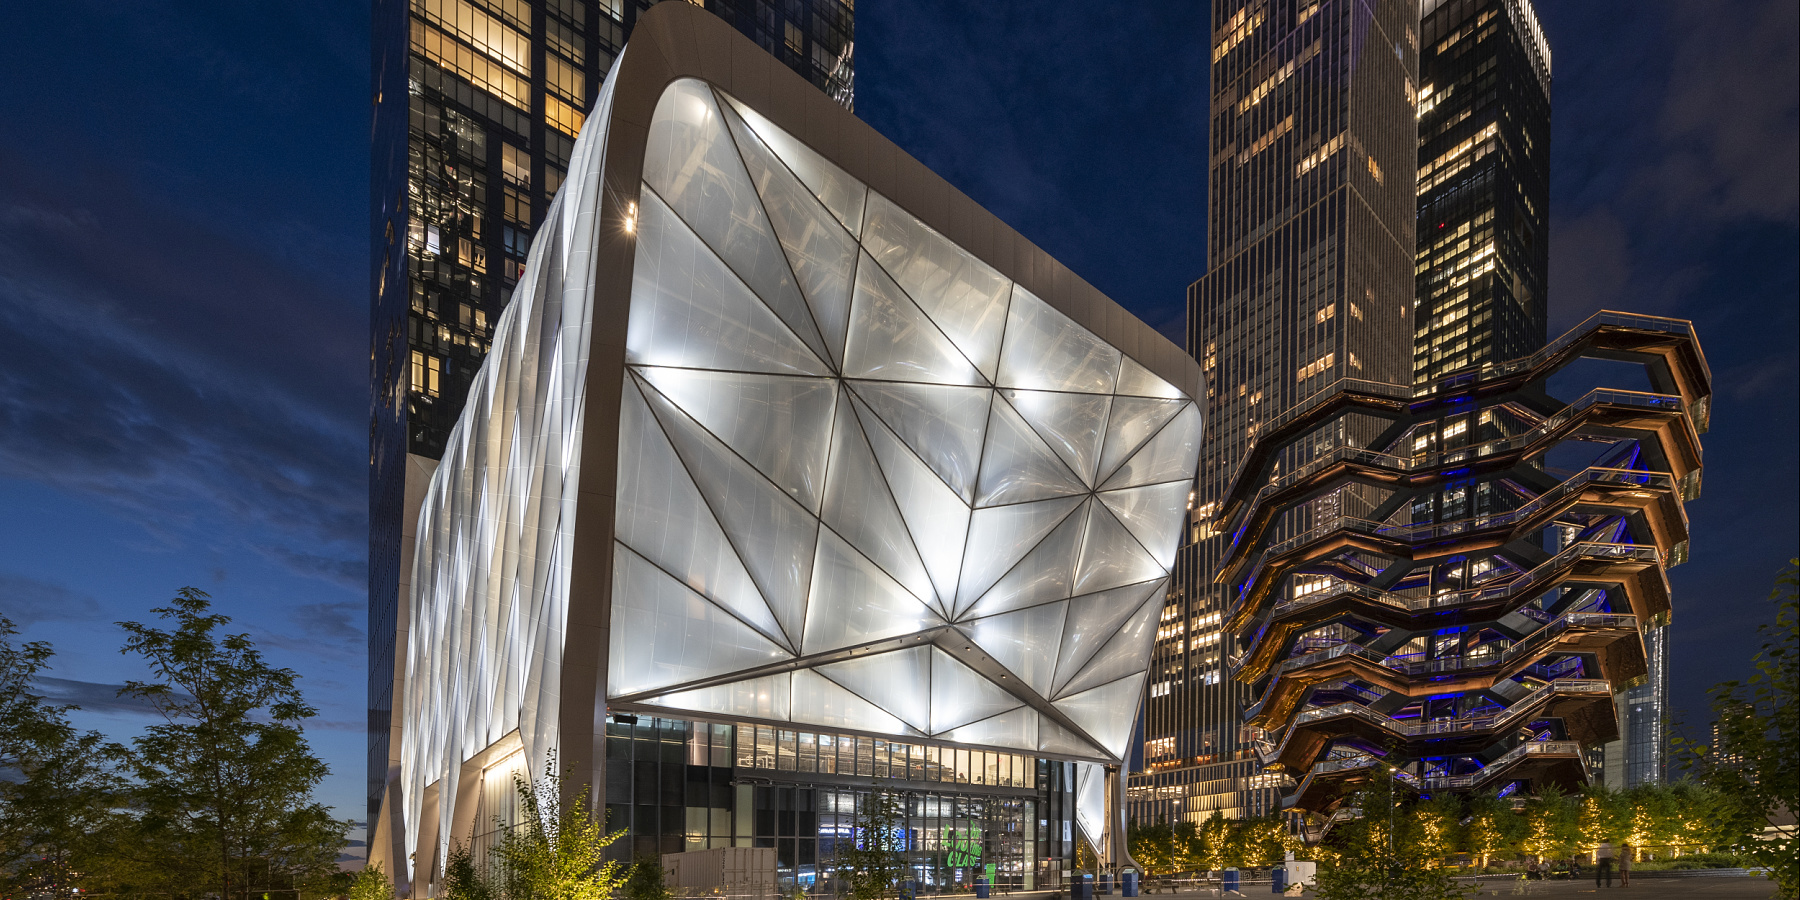 The Shed/Hudson Yards, New York City / ERCO, New York City, Hudson Yards, USA